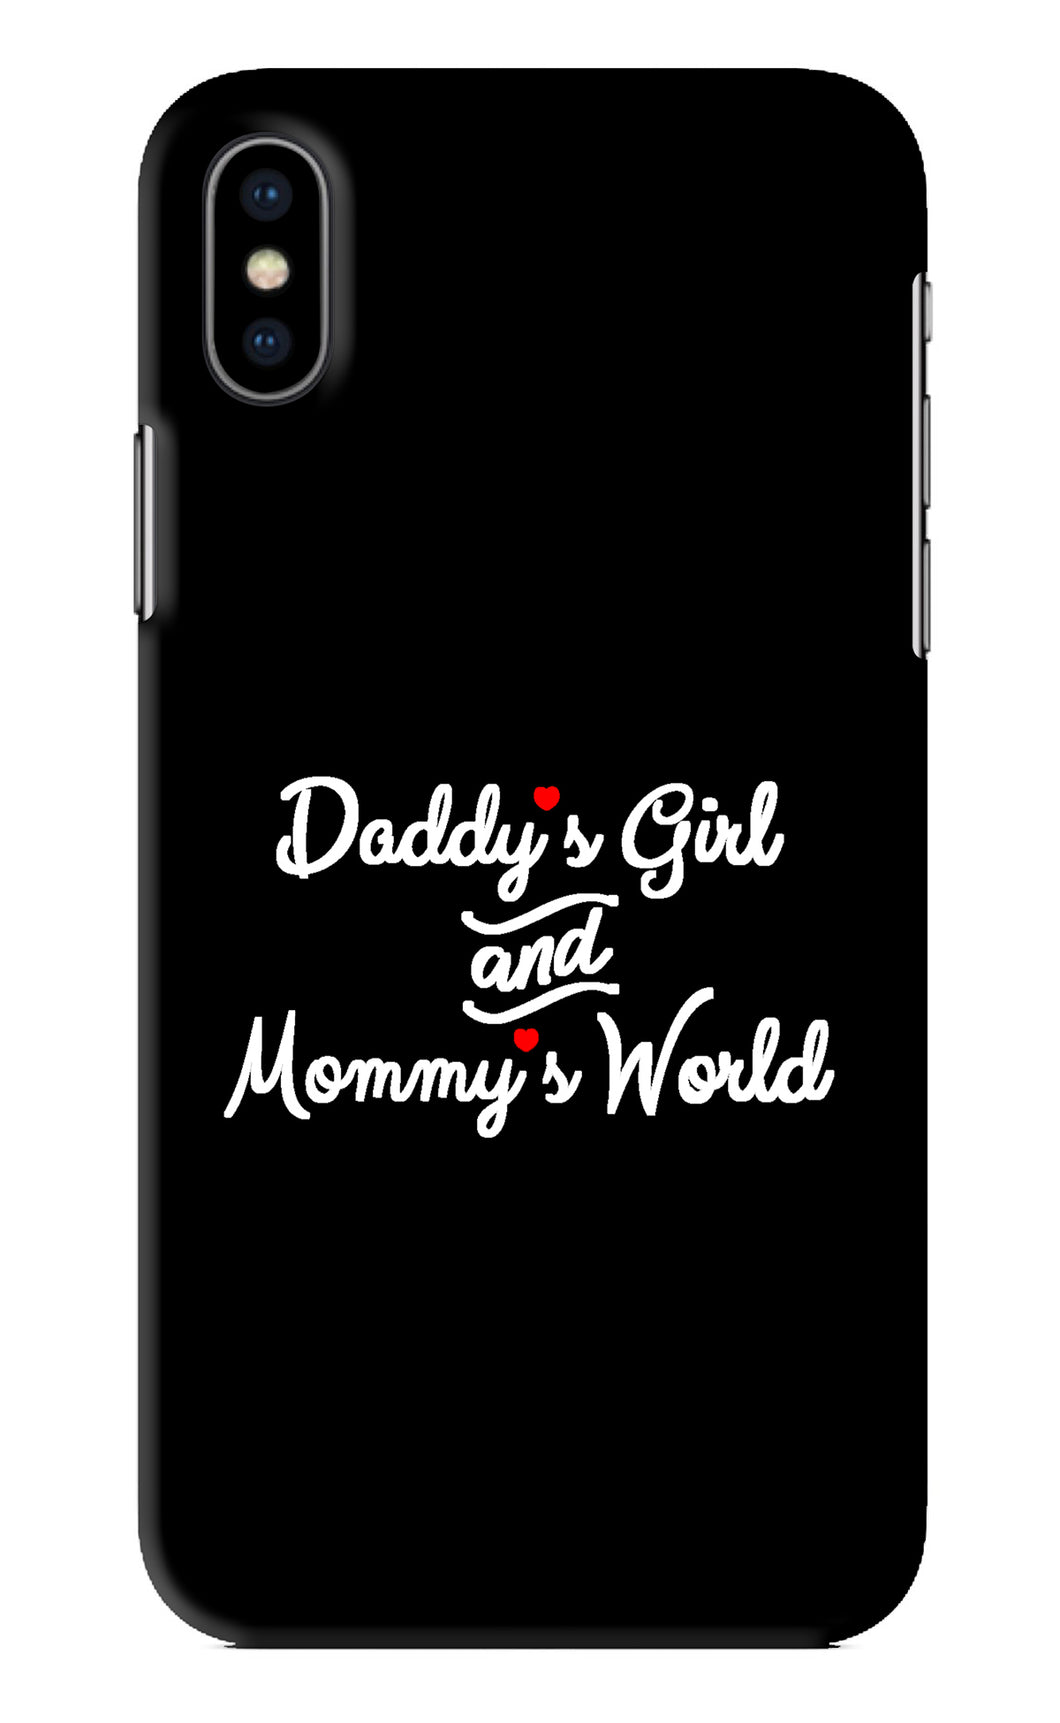 Daddy's Girl and Mommy's World iPhone XS Back Skin Wrap